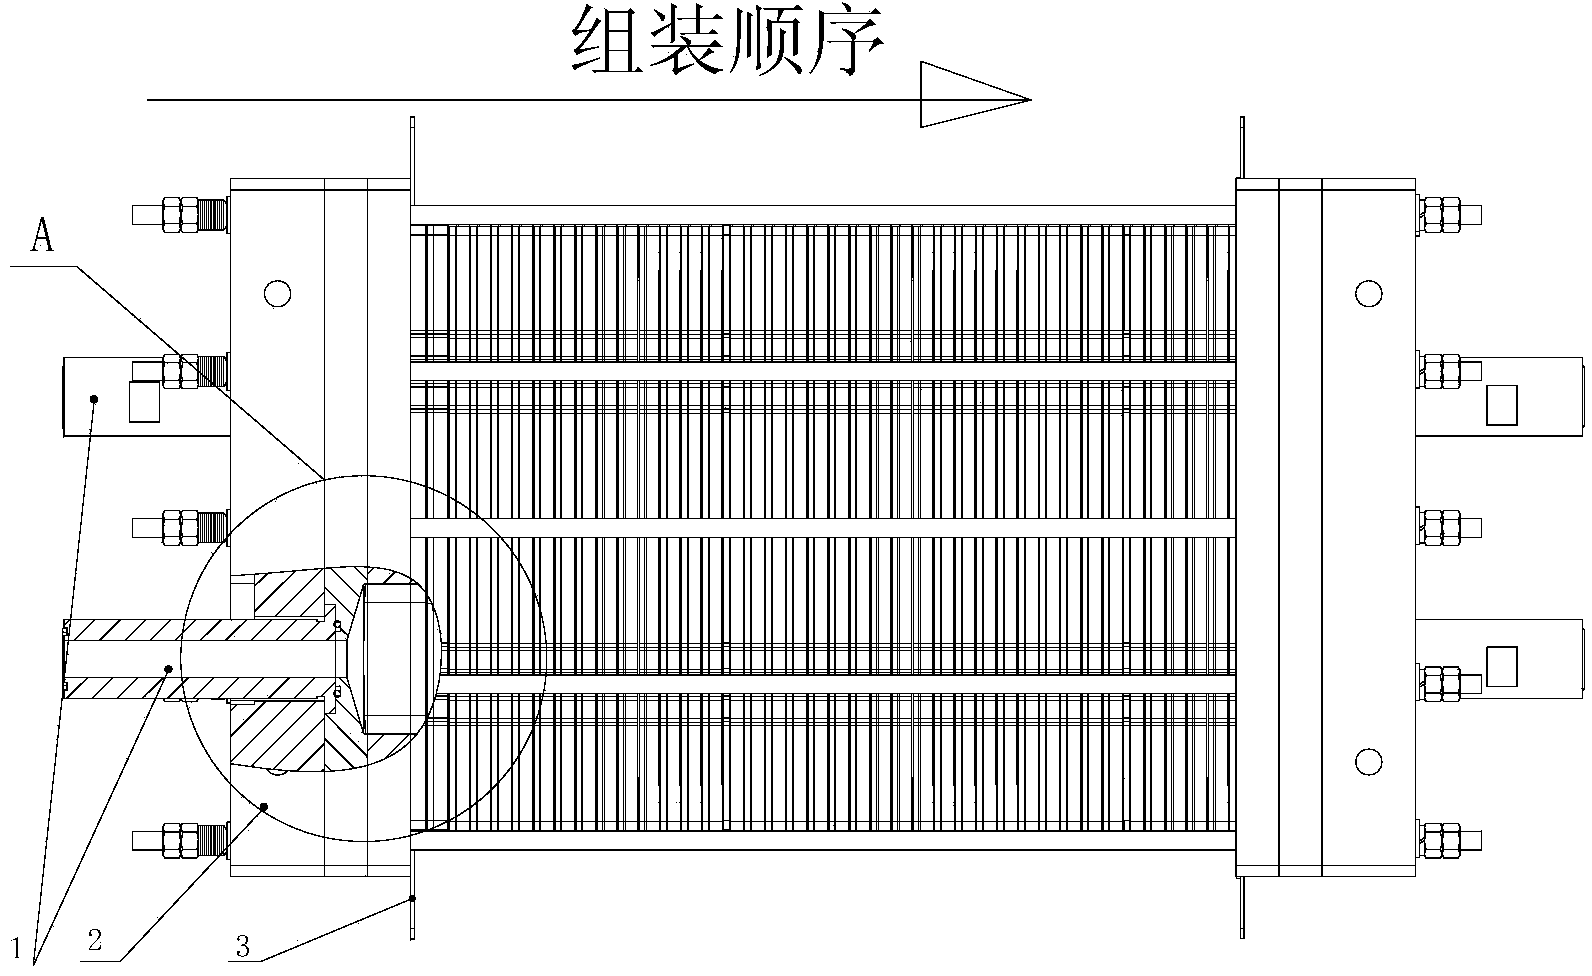 Liquid phase flow battery pile of Fe/Cr system